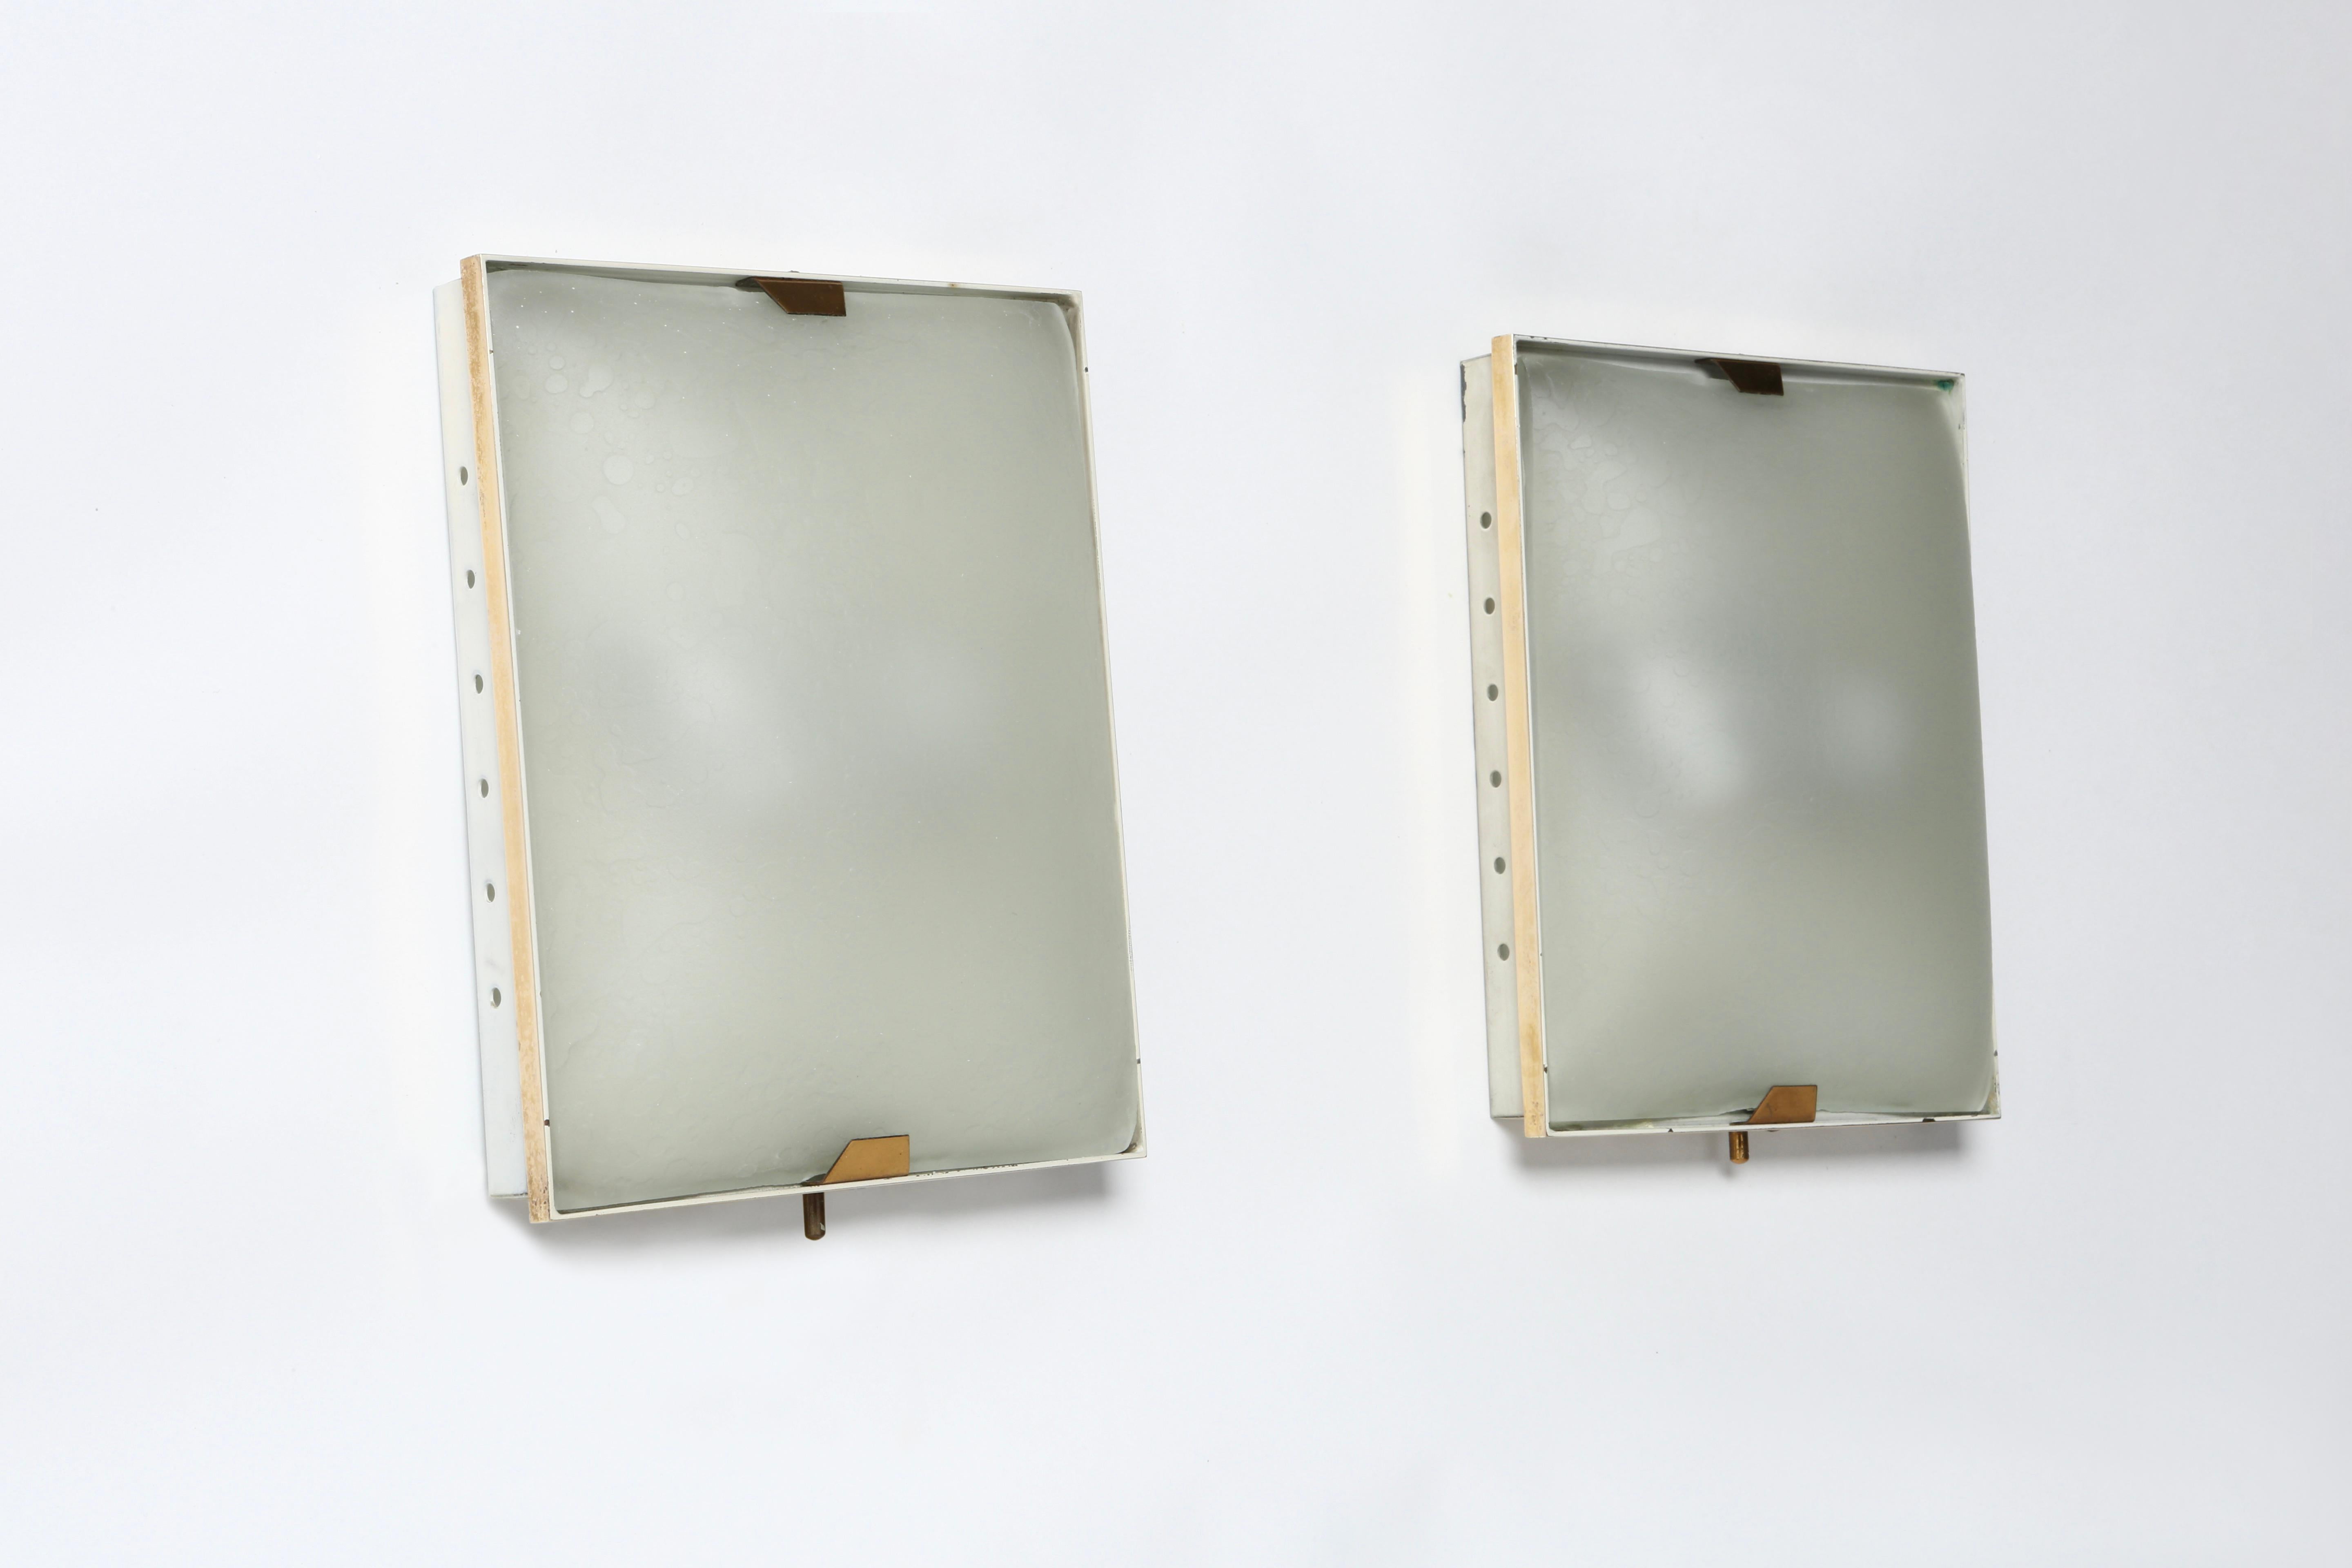 Stilnovo sconces, a pair.
Designed and manufactured in Italy 1960s.
Textured glass, brass, enameled metal.
